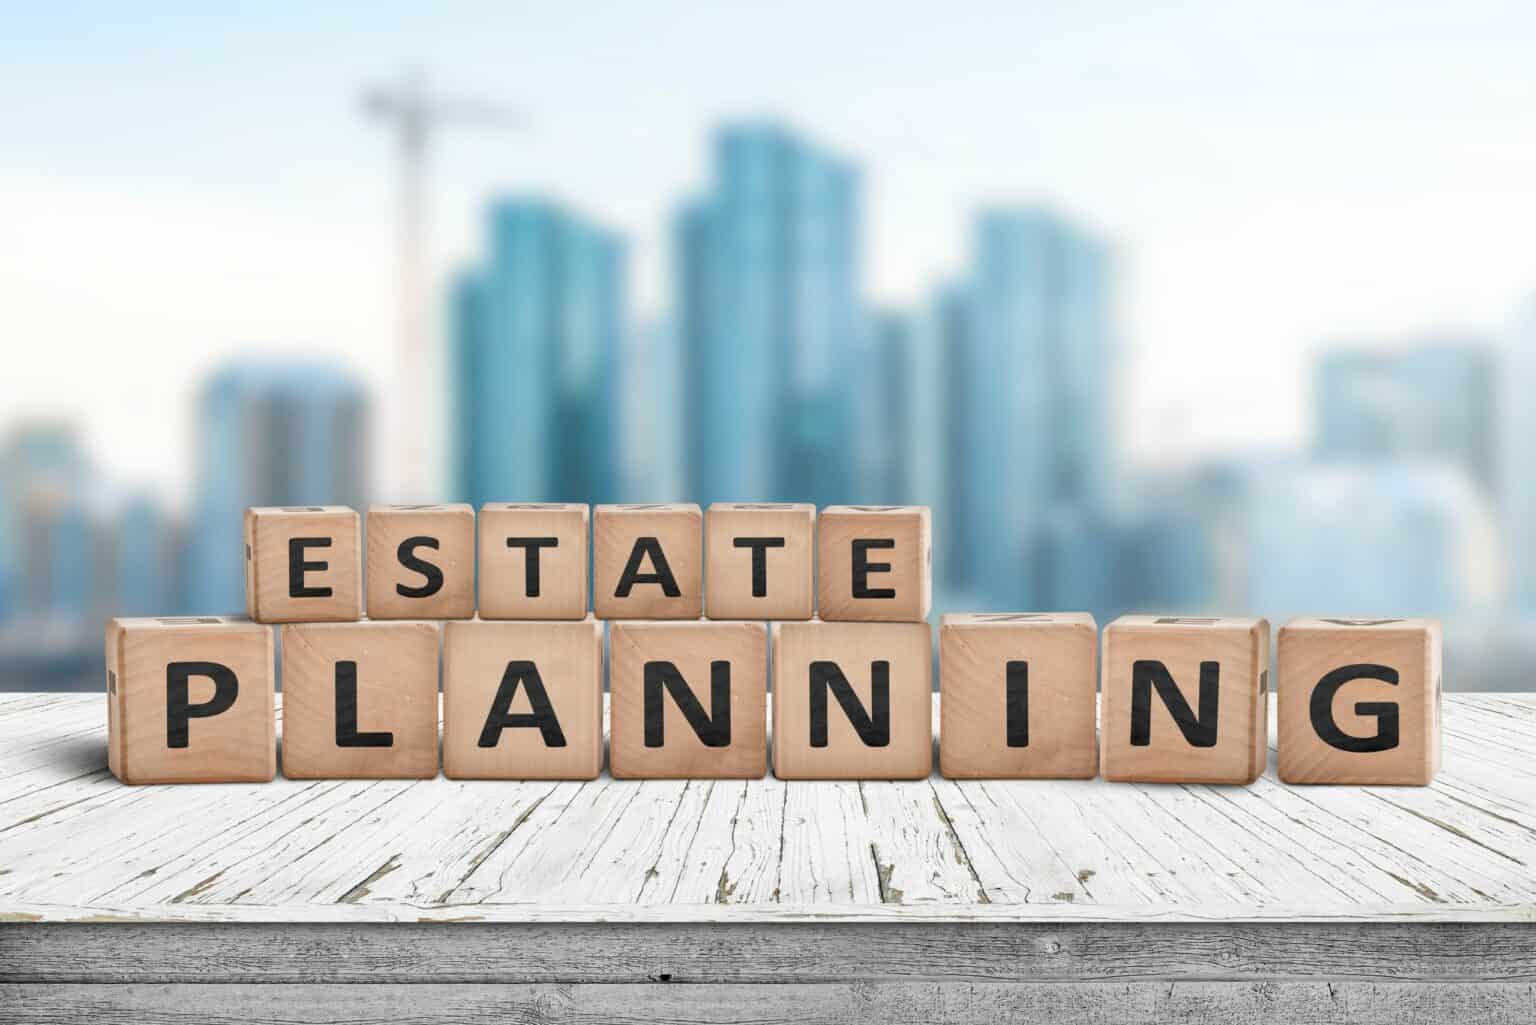 Gold Coast Law Firm ESTATE PLANNING